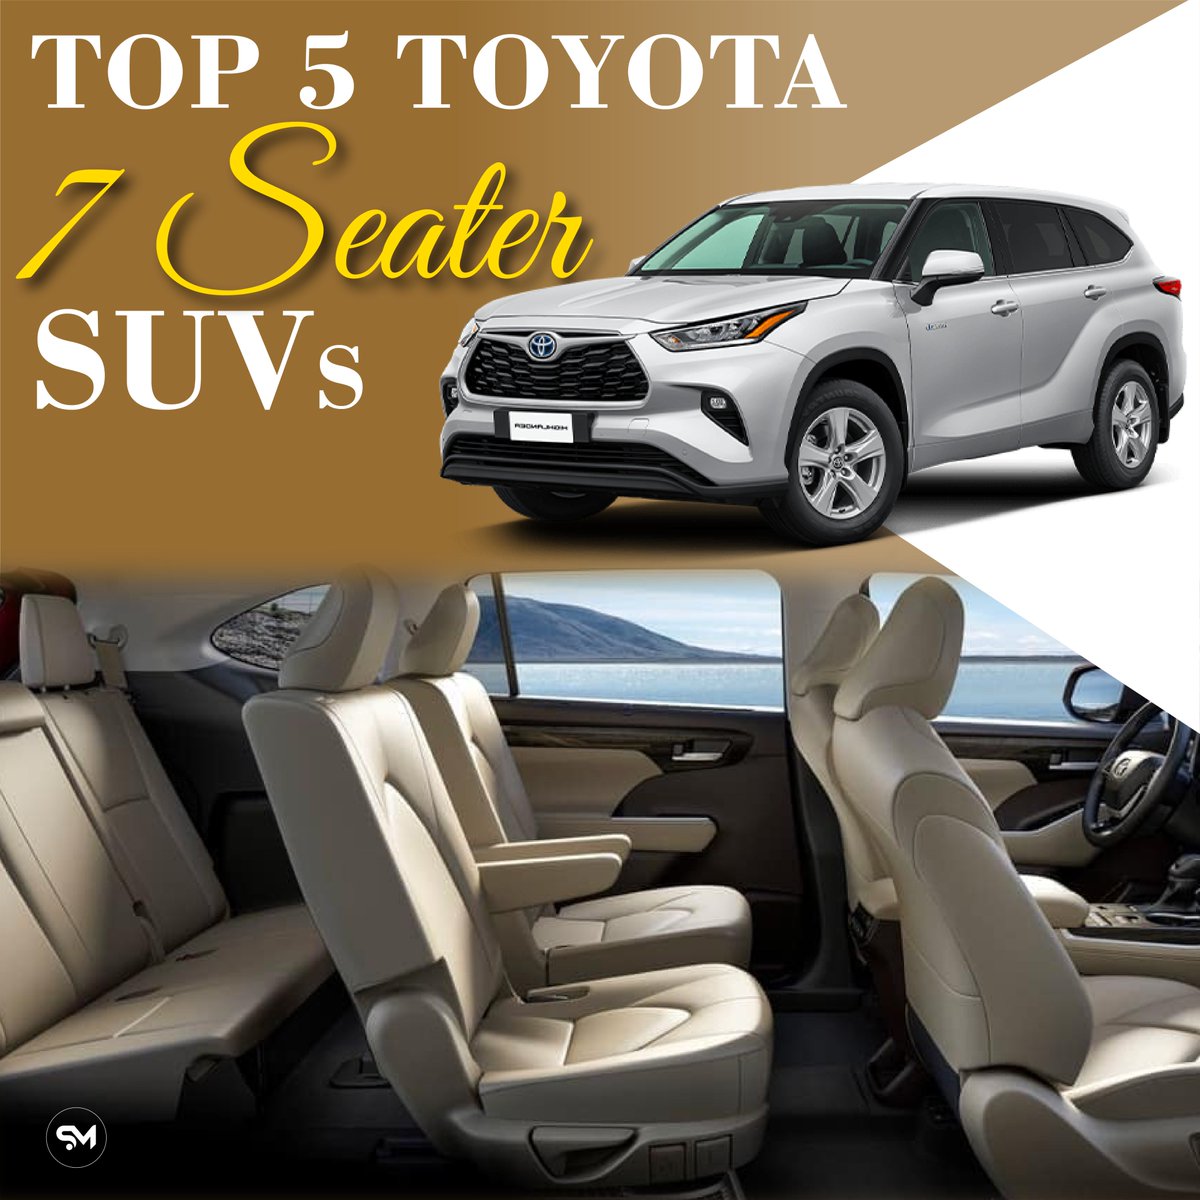 Top 5 Toyota 7-Seater SUVs!

Toyota offers an impressive range of 7-seater SUVs combining practicality, and reliability, ensuring that both passengers' comfort.

Check out the blog ➡️: spoliamag.com/toyota-7-seate…
 
#toyotasuv #toyata7seater #2023cars
#bestcars #cars